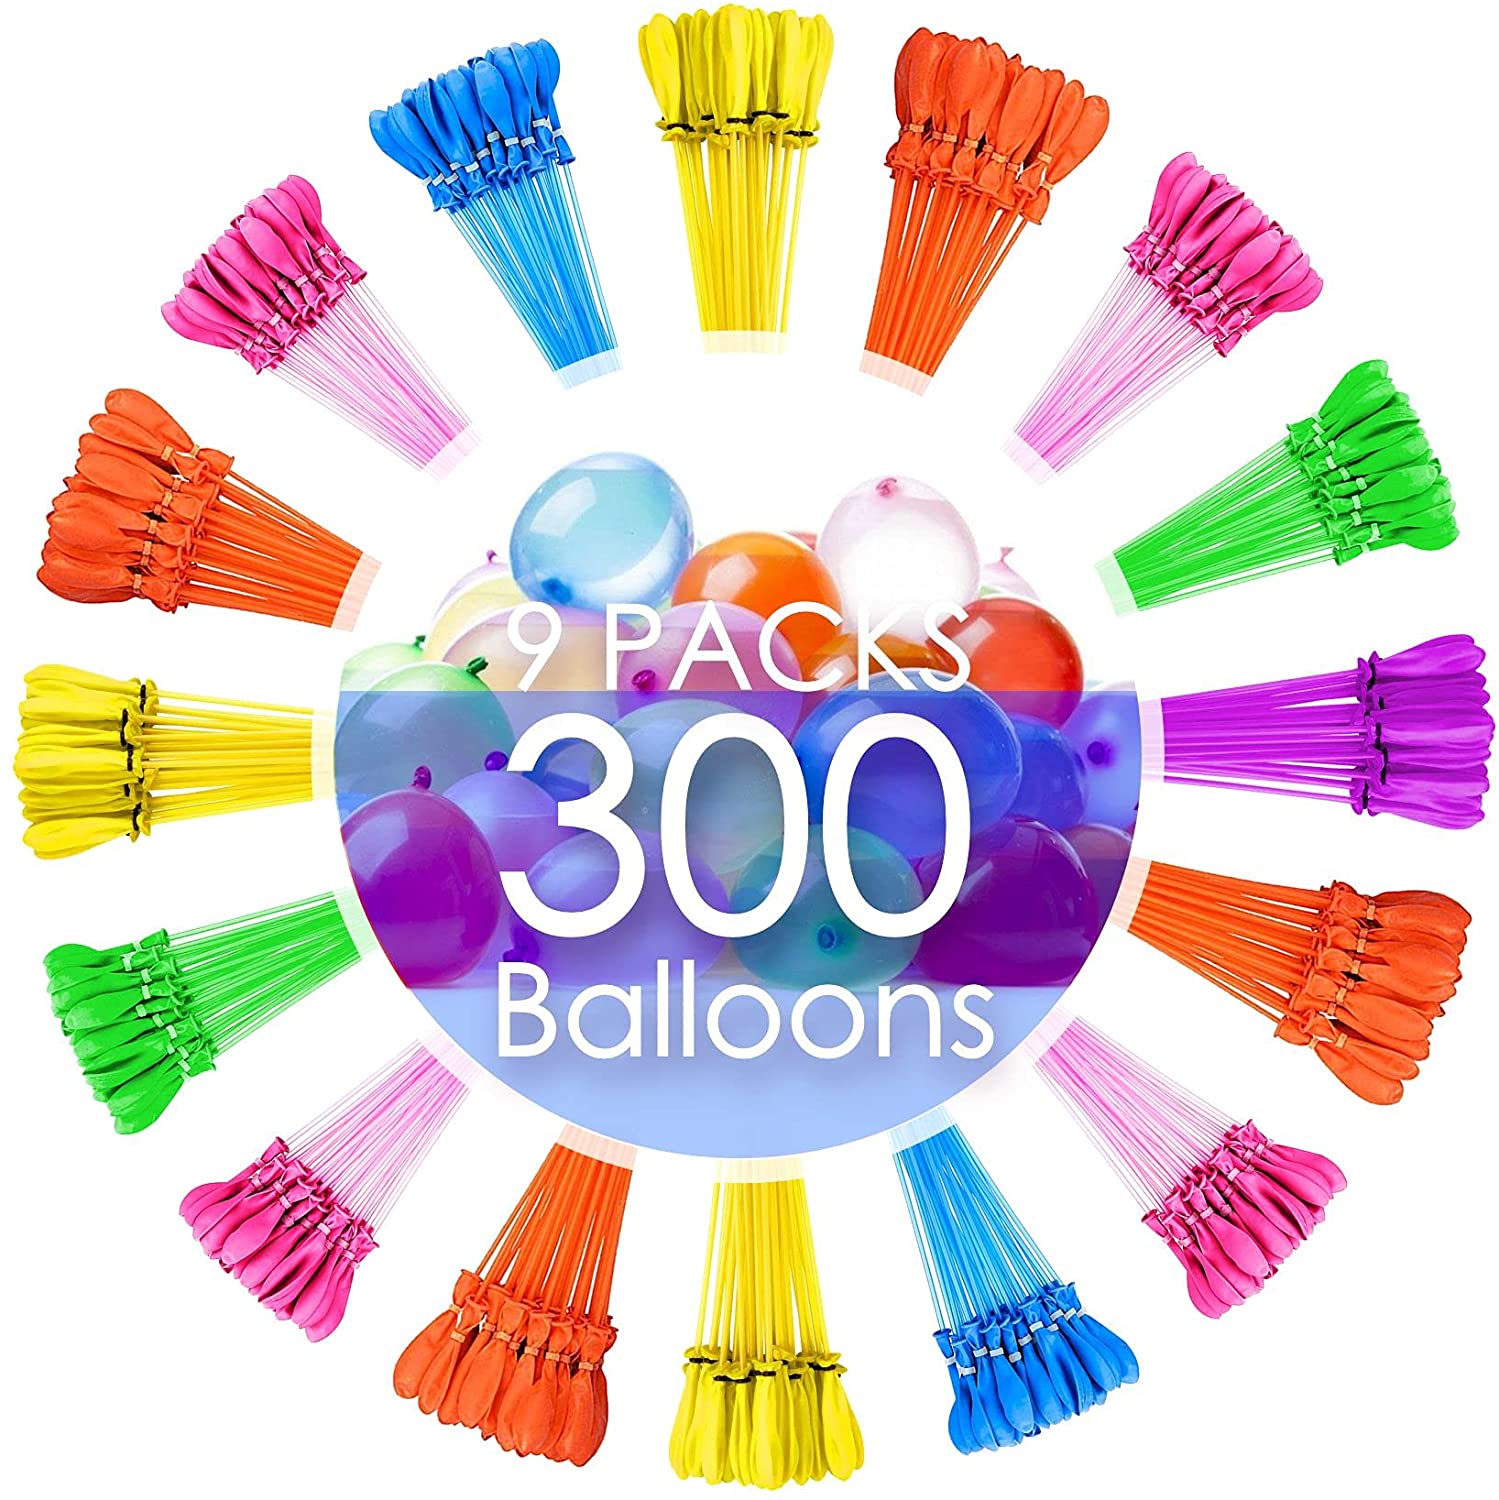 FEECHAGIER Water Balloons for Kids Girls Boys Balloons Set Party Games Quick Fill 444 Balloons 12 Bunches for Swimming Pool Outdoor Summer Fun 12